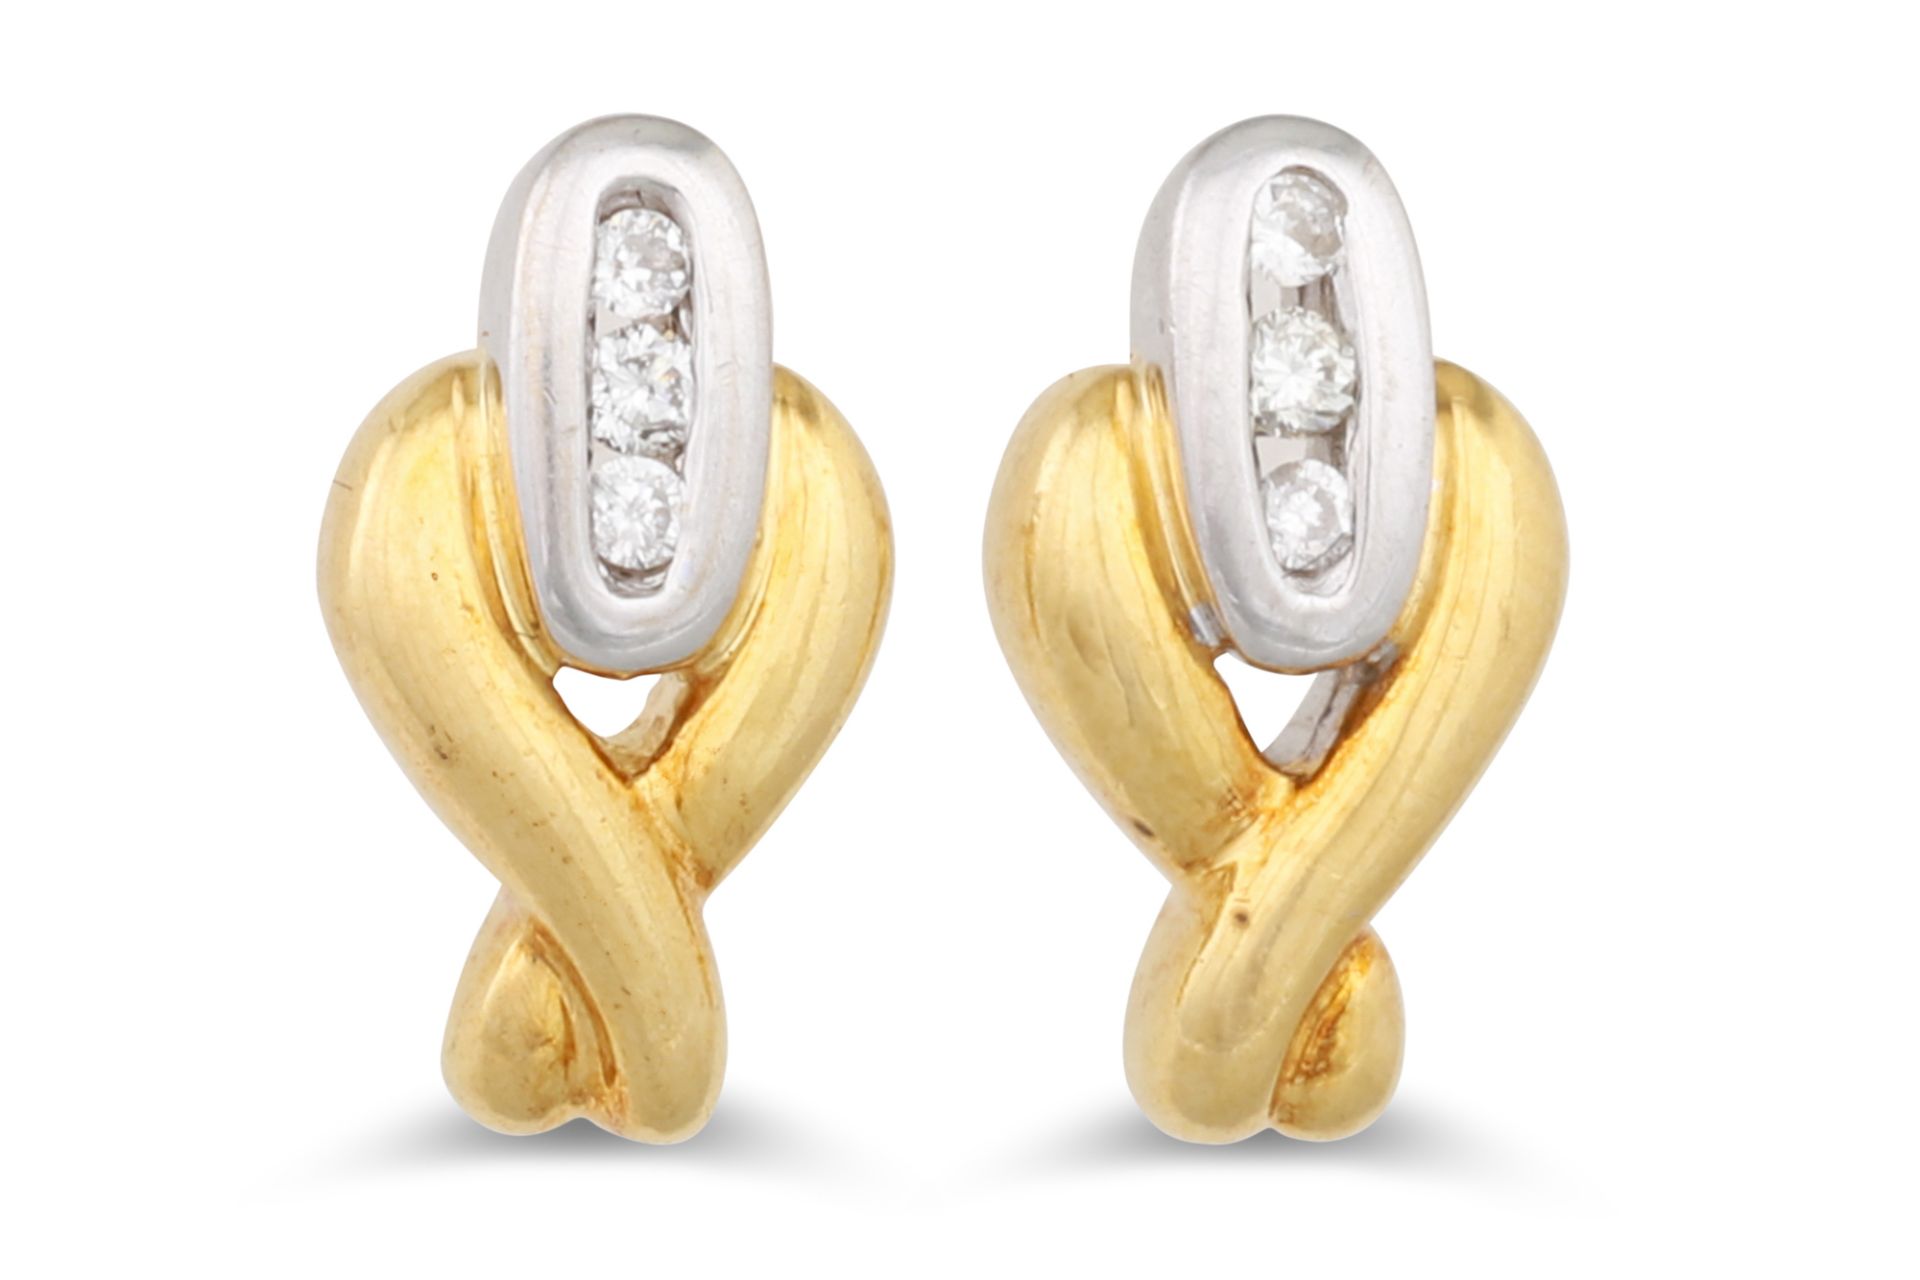 A PAIR OF DIAMOND SET EARRINGS, mounted in 18ct white and yellow gold, of cross over design, mounted